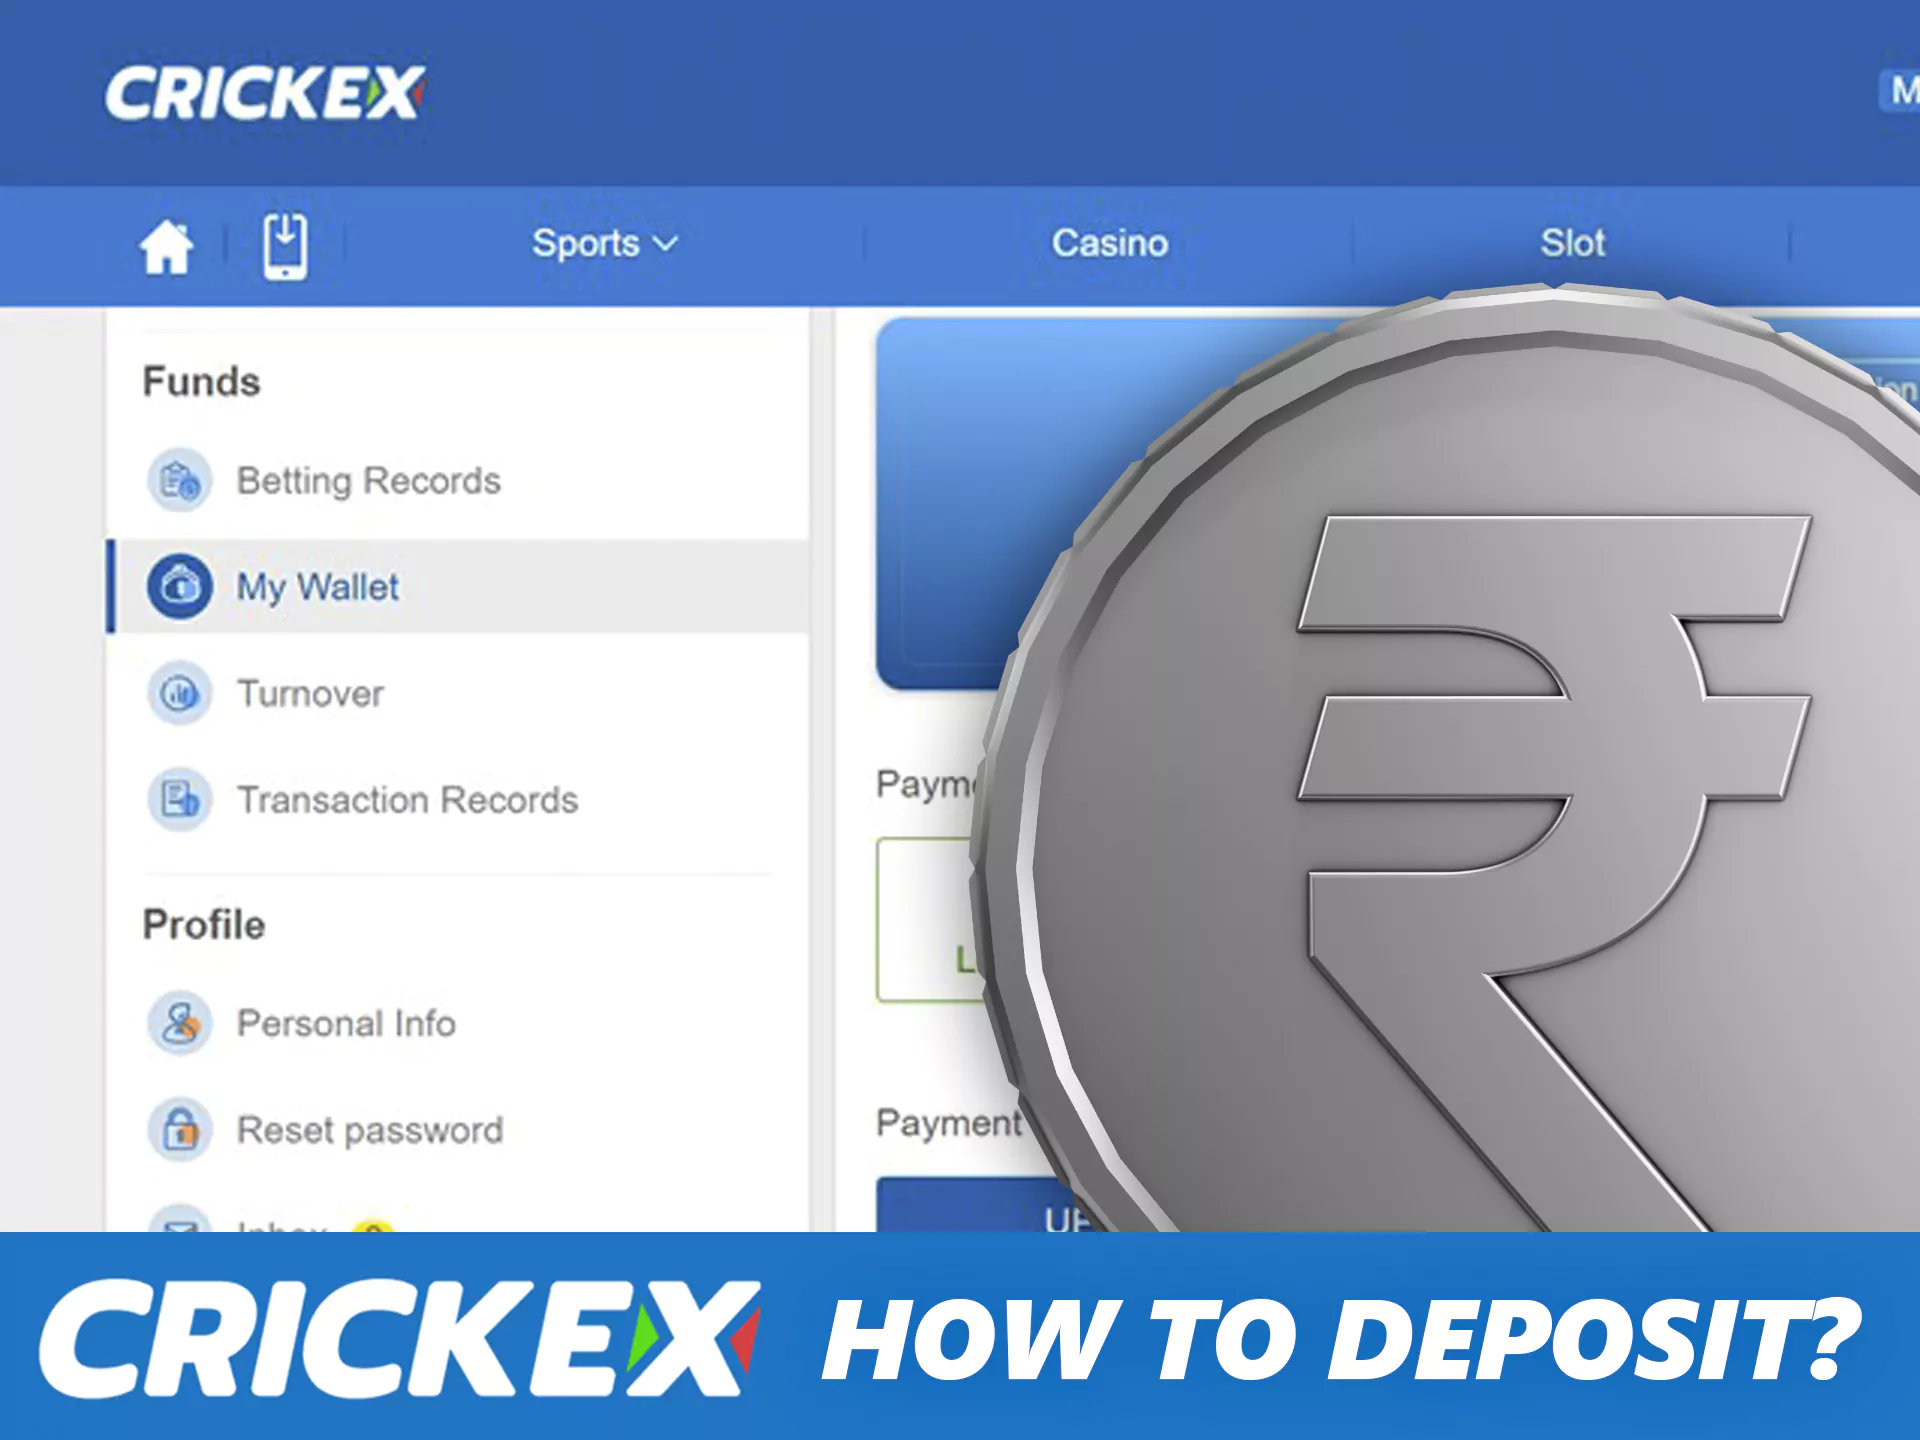 Make a deposit to Crickex in any supported way.